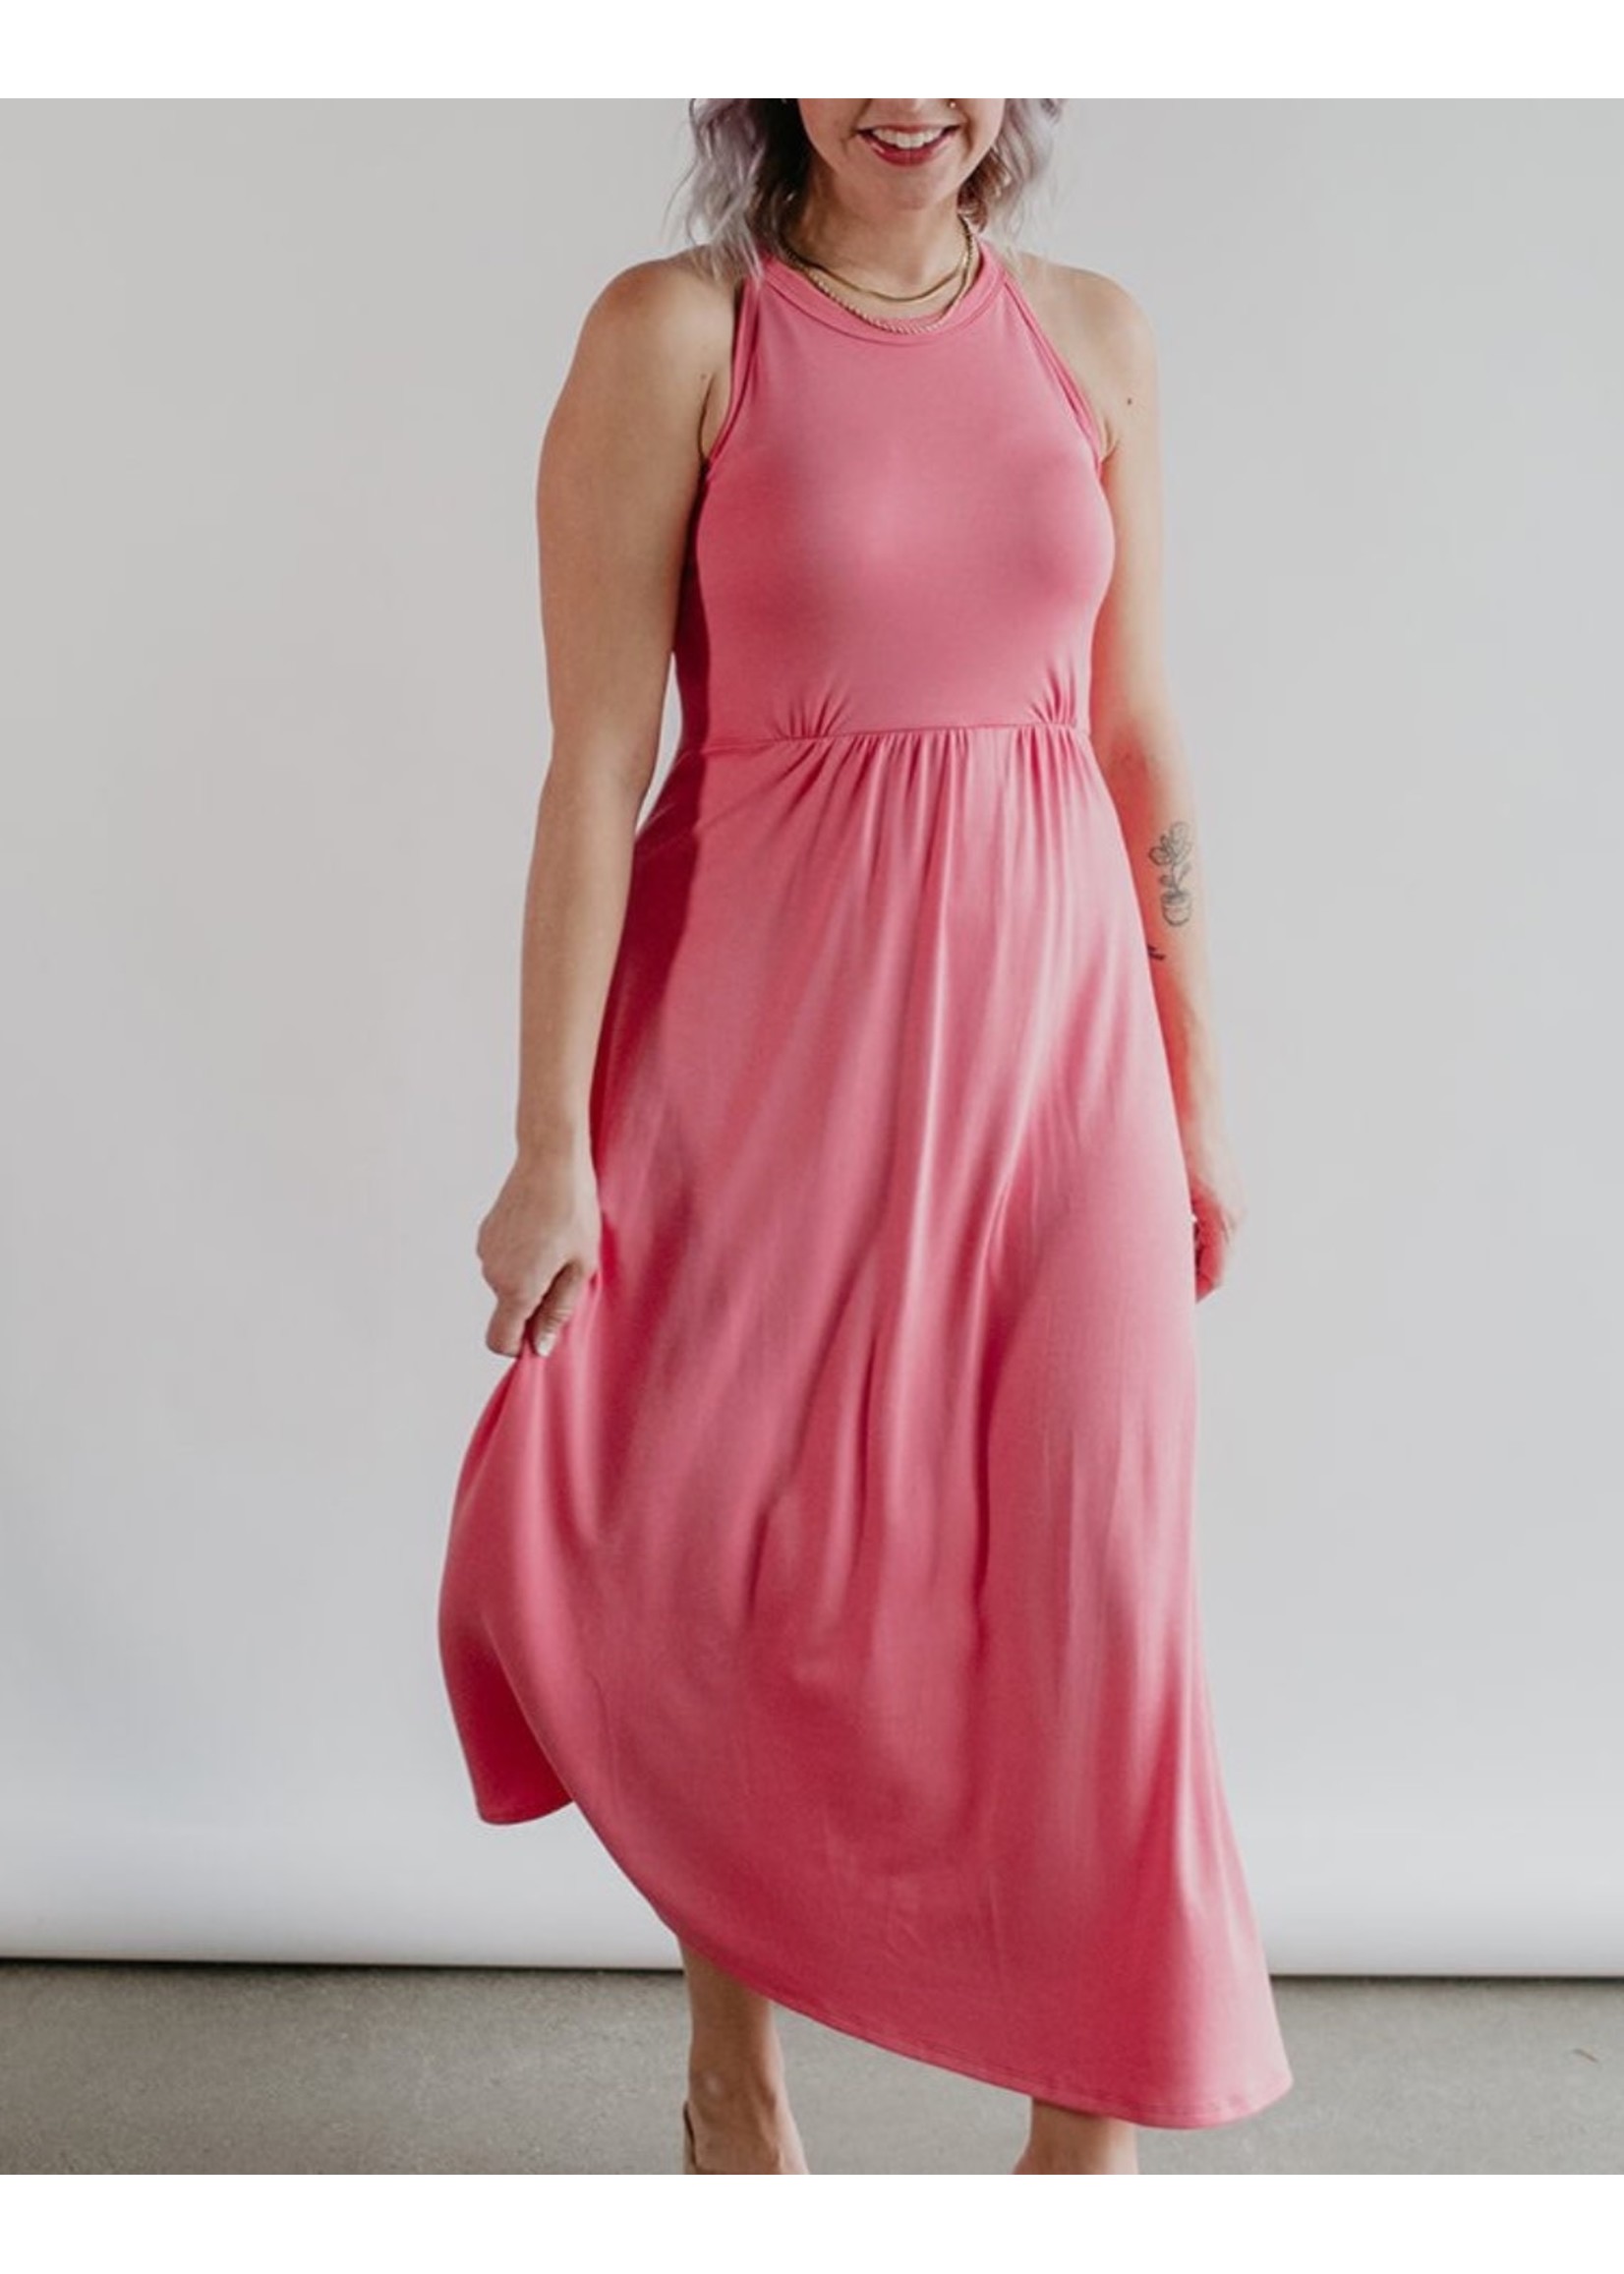 The Kindred Studio The Kindred Studio, Women's Maxine Dress in Flamingo Pink